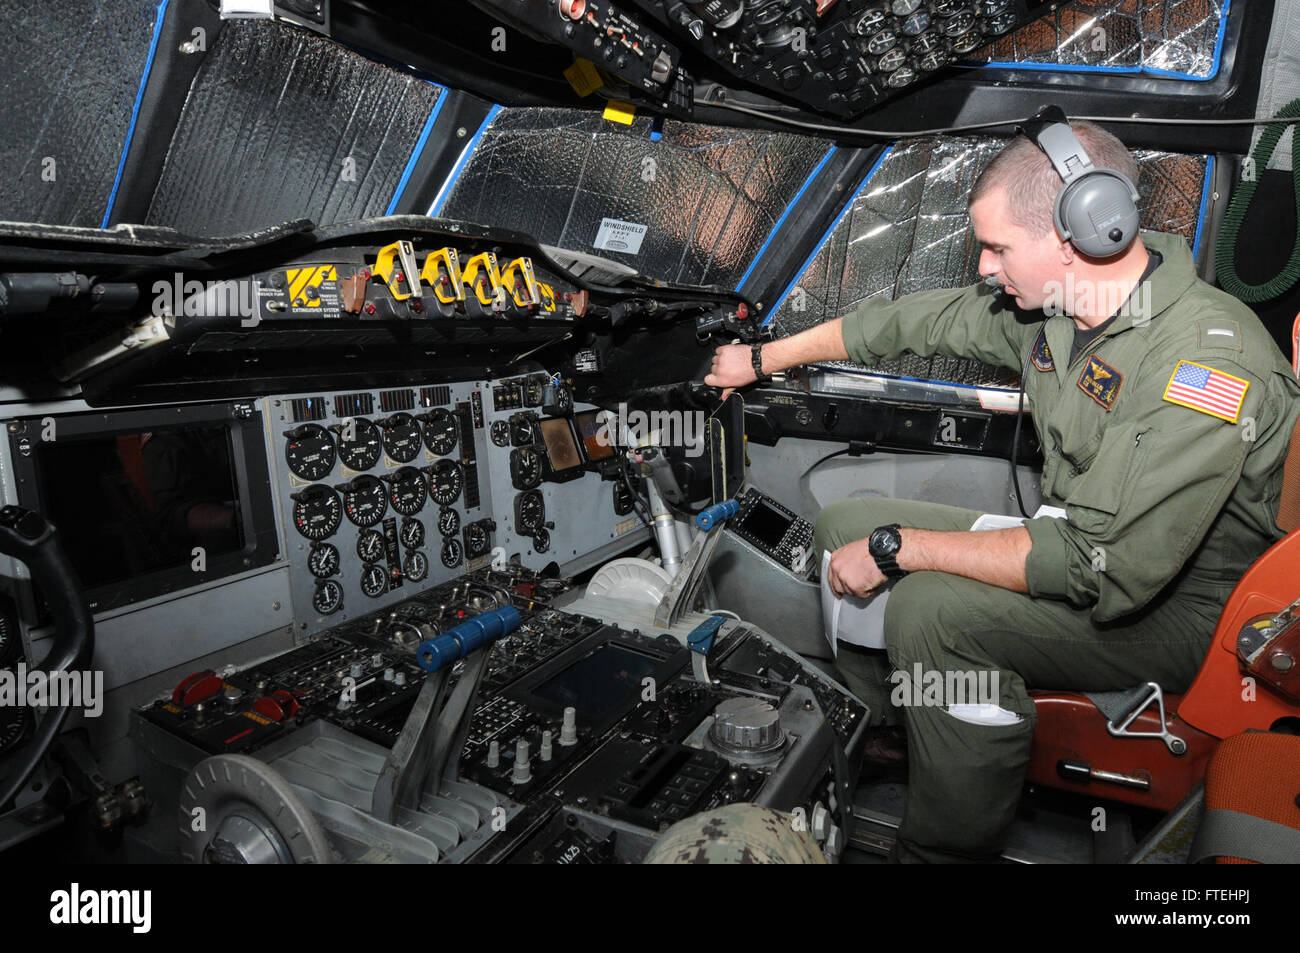 SIGONELLA, Sicily (Oct. 28, 2014) – Lt. j.g. Ryan Miller assigned to Patrol Squadron FOUR (VP 4) checks the intercommunications system of a P-3C Orion maritime patrol aircraft during pre-flight. VP 4 is conducting naval operations in the U.S. 6th Fleet area of operations in support of U.S. national security interests in Europe. Stock Photo